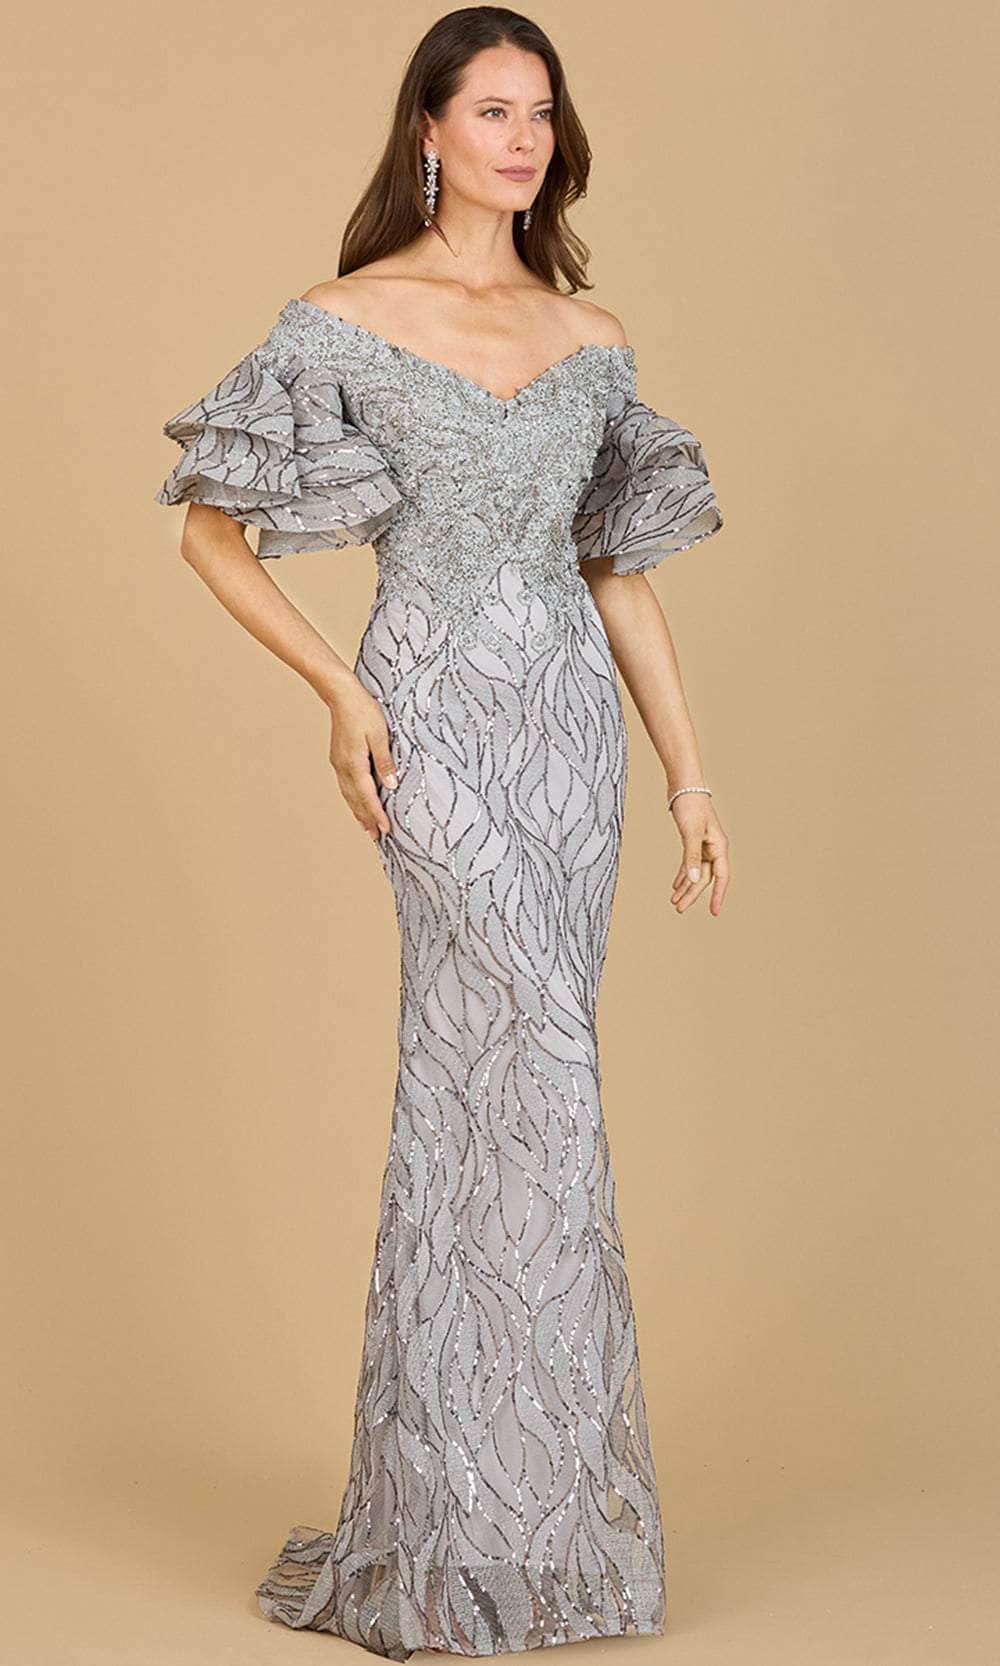 Lara Dresses 29190 - Tiered Sleeve V-Neck Evening Gown Special Occasion Dress 4 / Slate